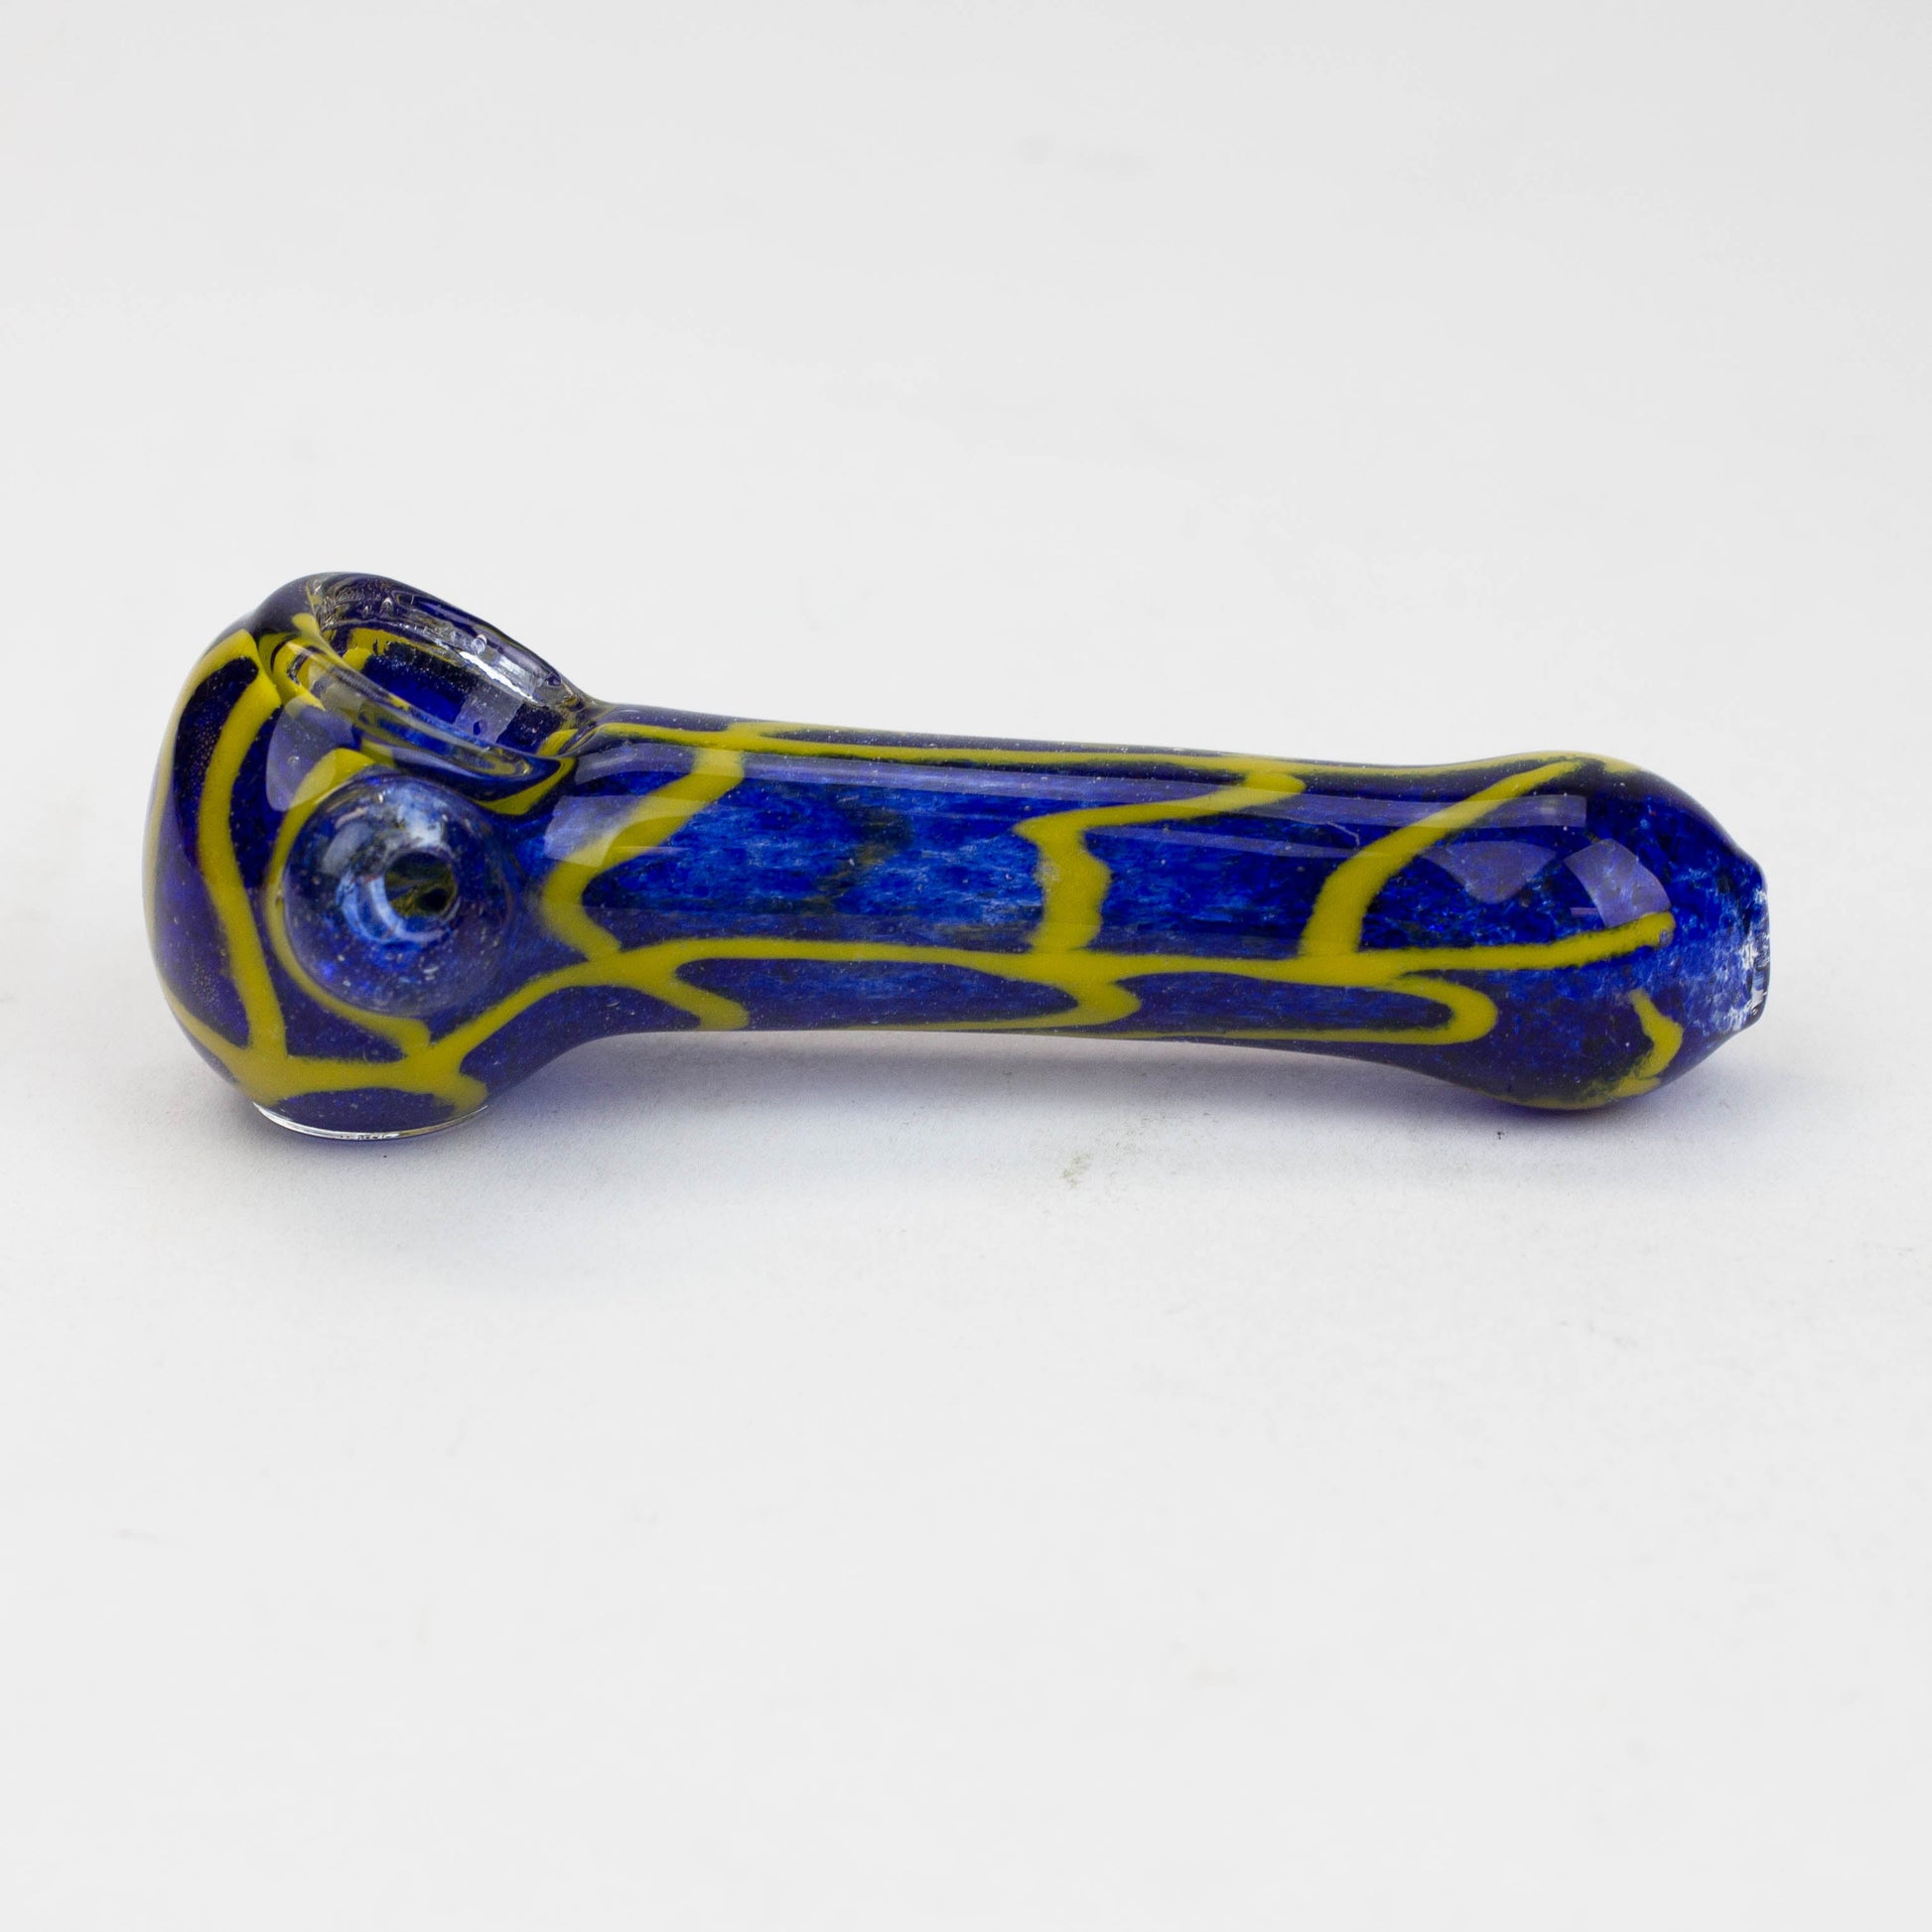 5" soft glass hand pipe [8983]_3